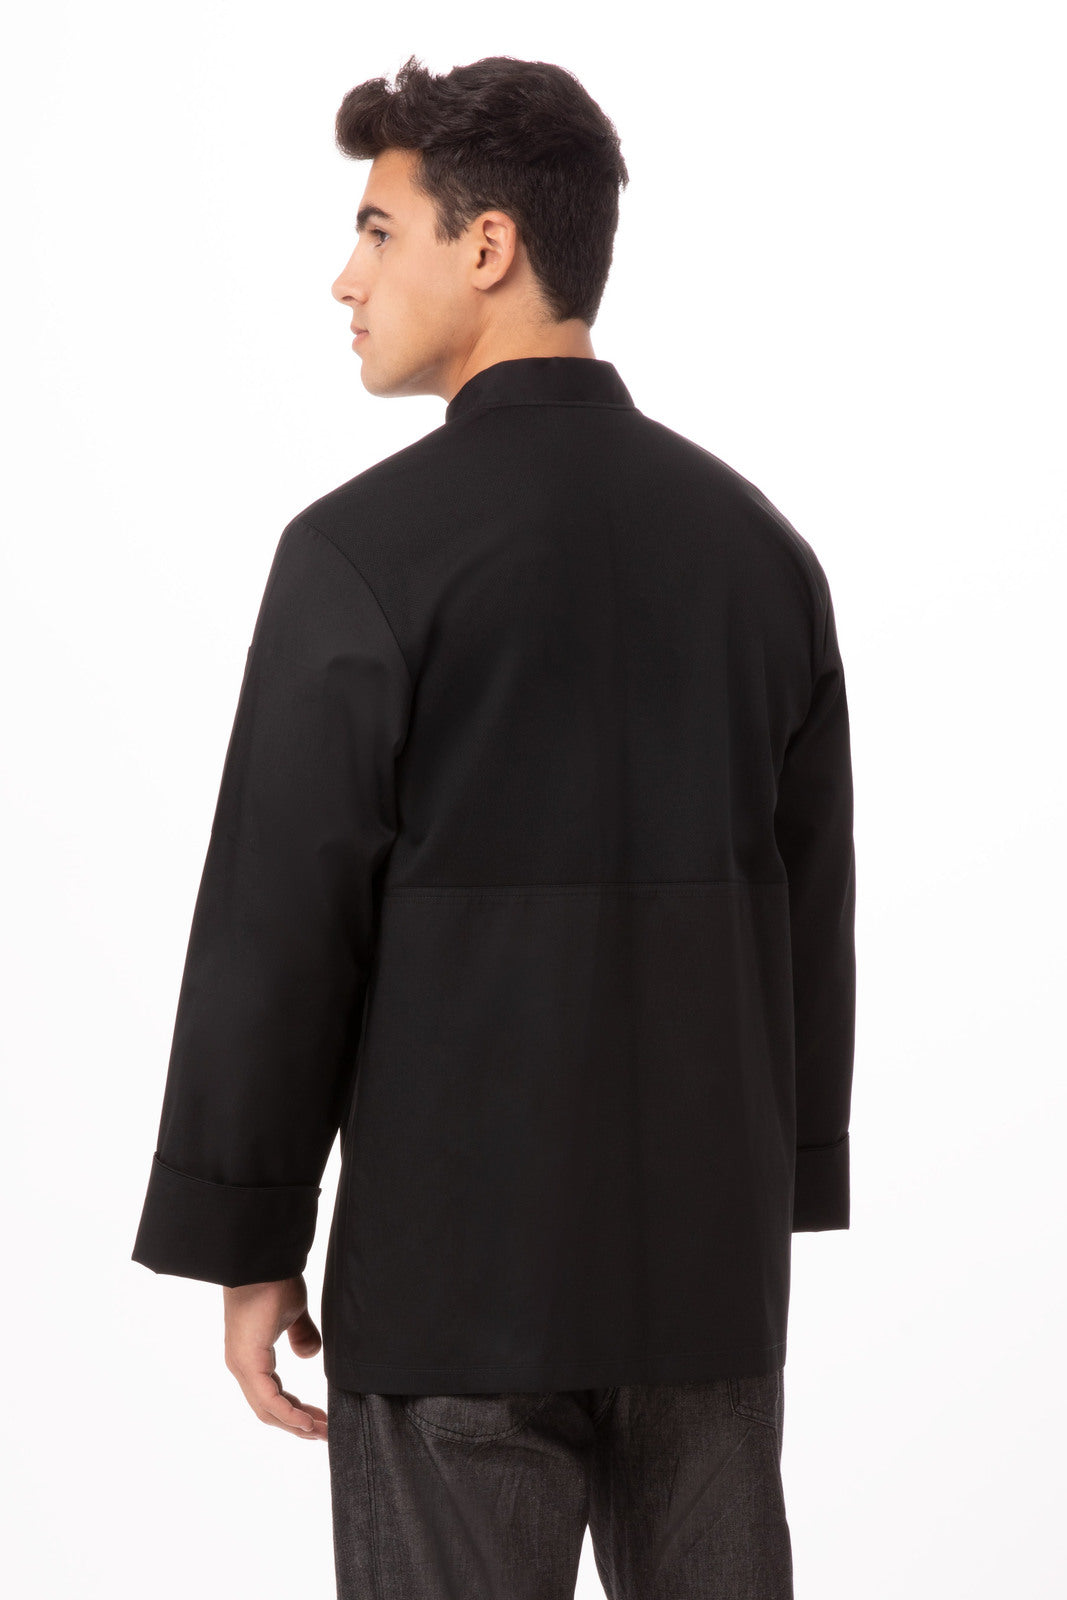 Chef Works Calgary Cool Vent Basic Chef Jacket-(JLLS)